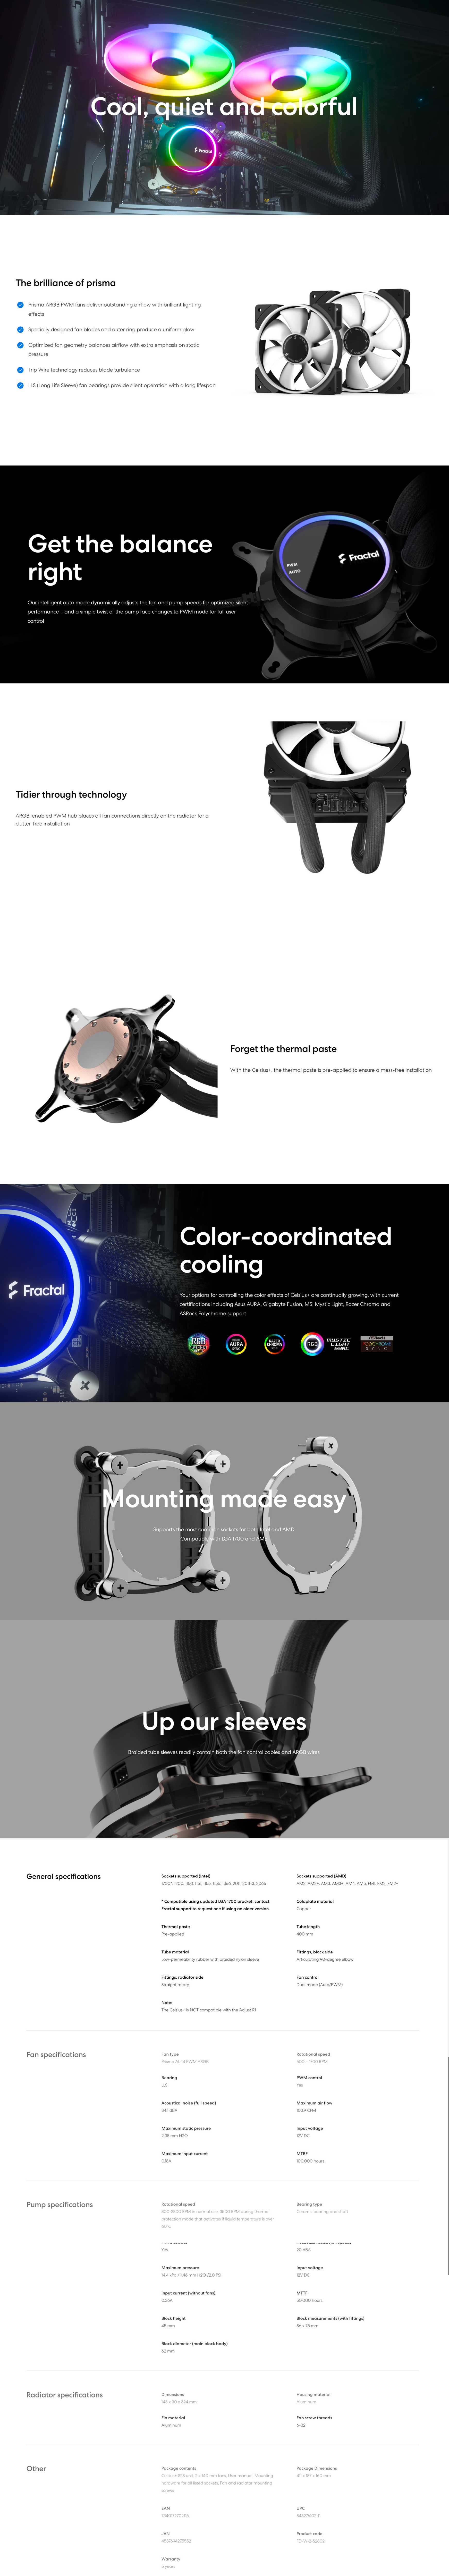 A large marketing image providing additional information about the product Fractal Design Celsius+ S28 Prisma 280mm AIO CPU Cooler - Additional alt info not provided